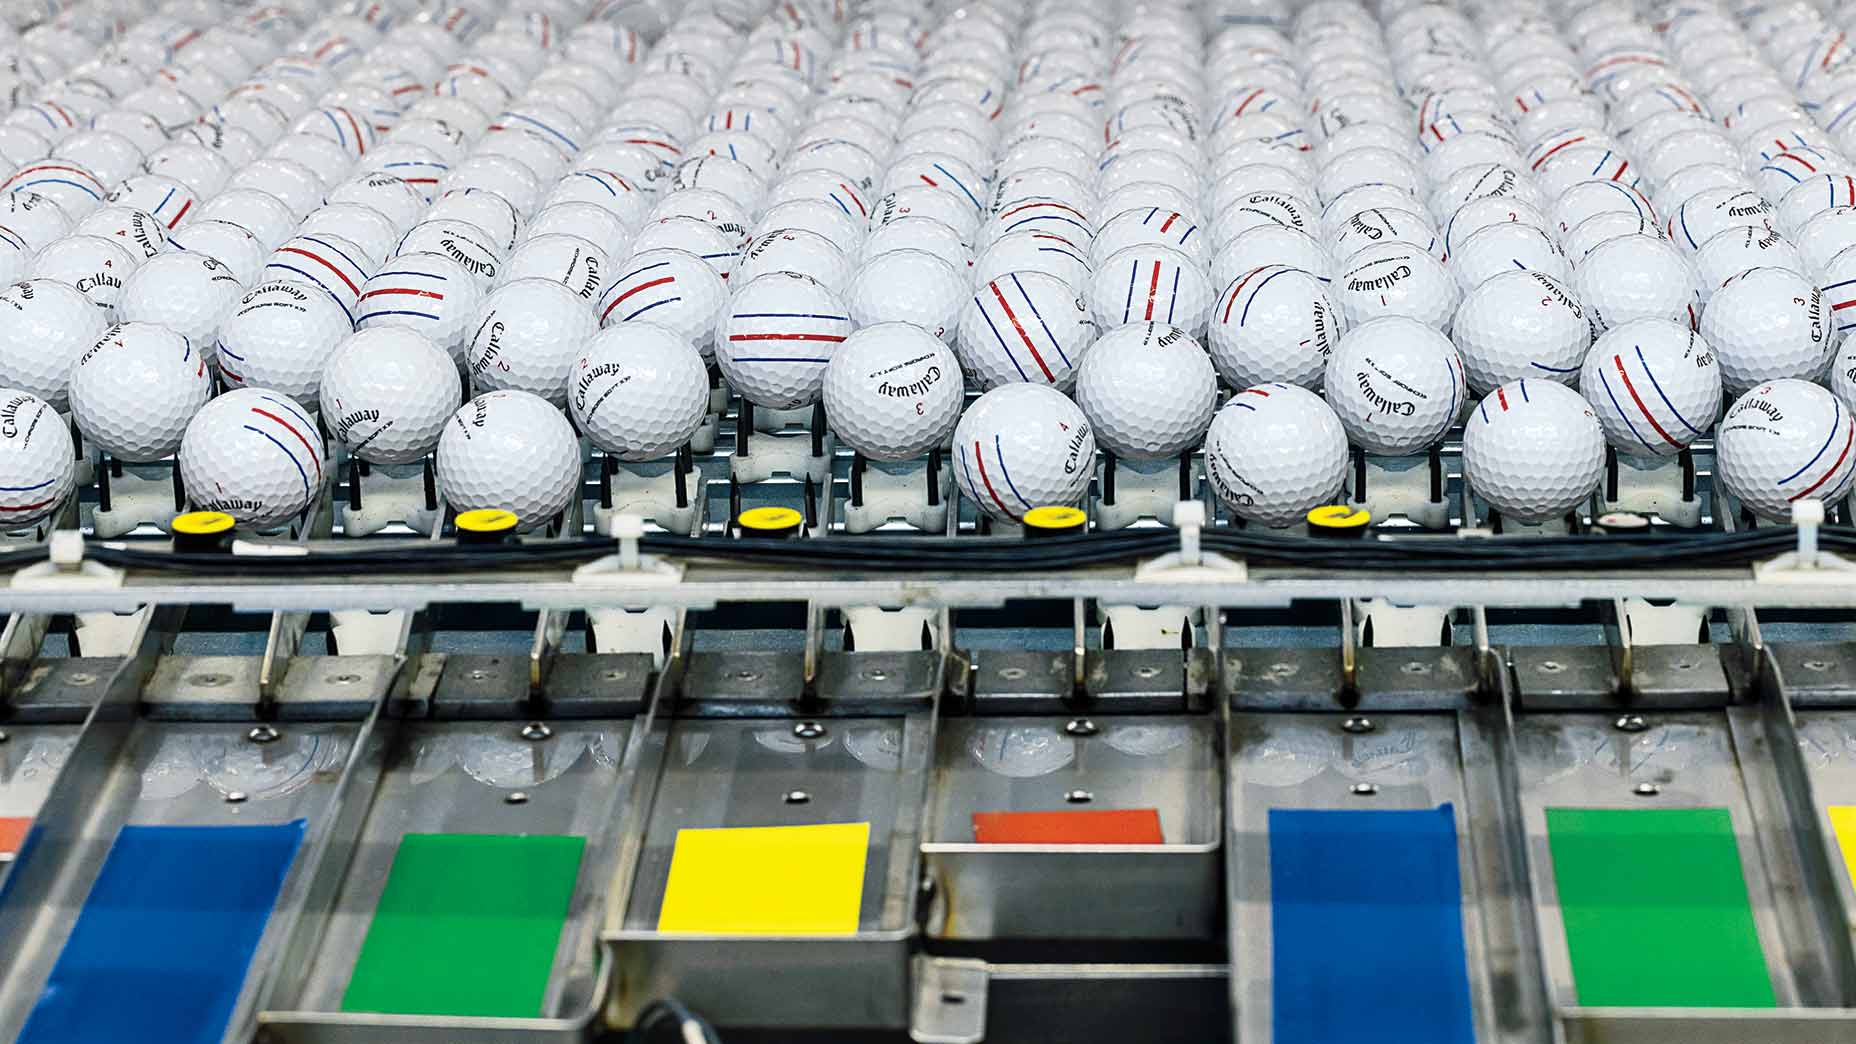 A look inside the Callaway ball plant.